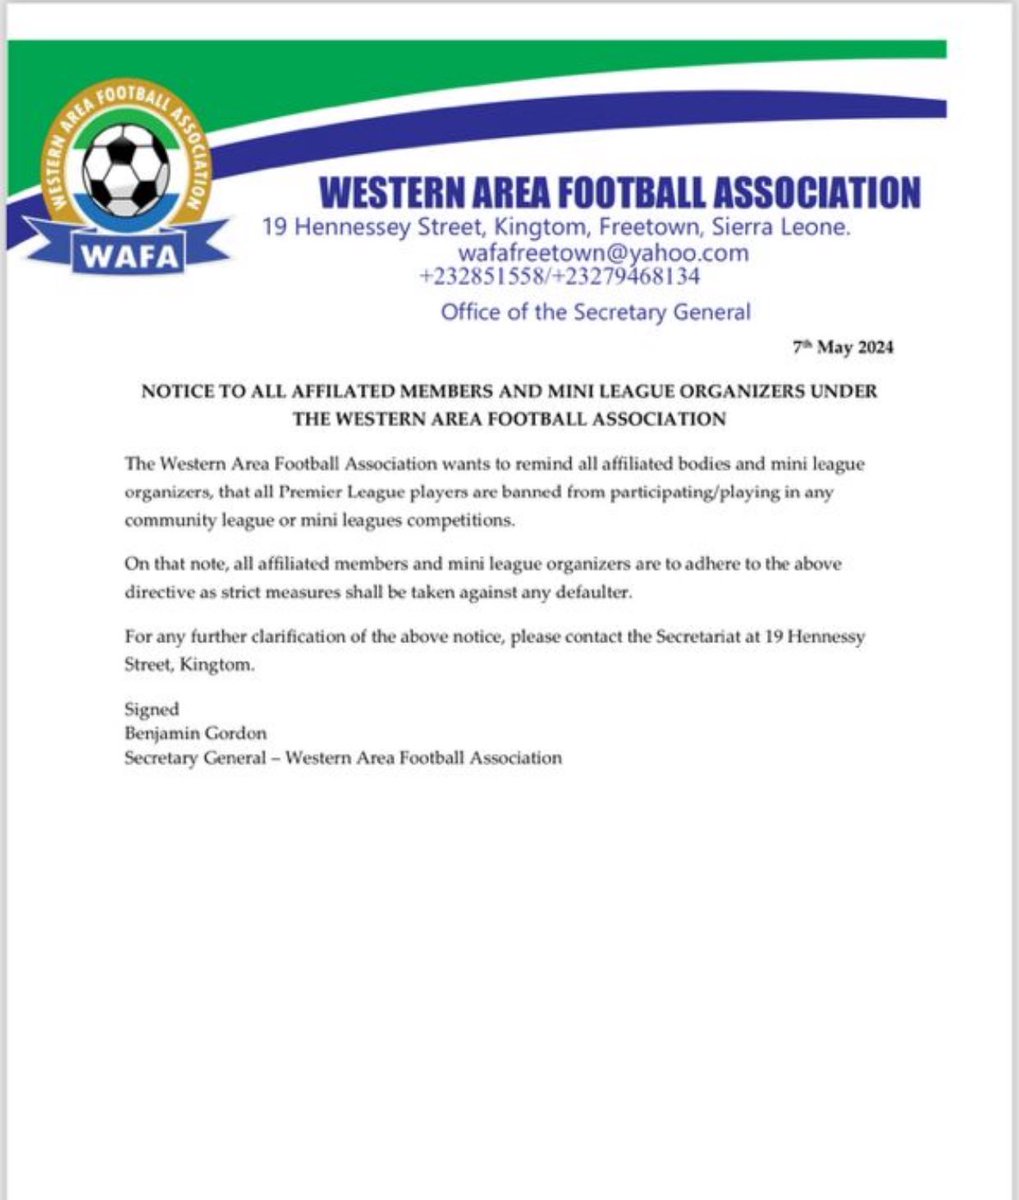 Western Area Football Association or #WAFA has banned premier league players in Sierra Leone from participating in junior or community leagues. This is not the first time such statement is coming from football bodies in Sierra Leone but it has always not being countenance by